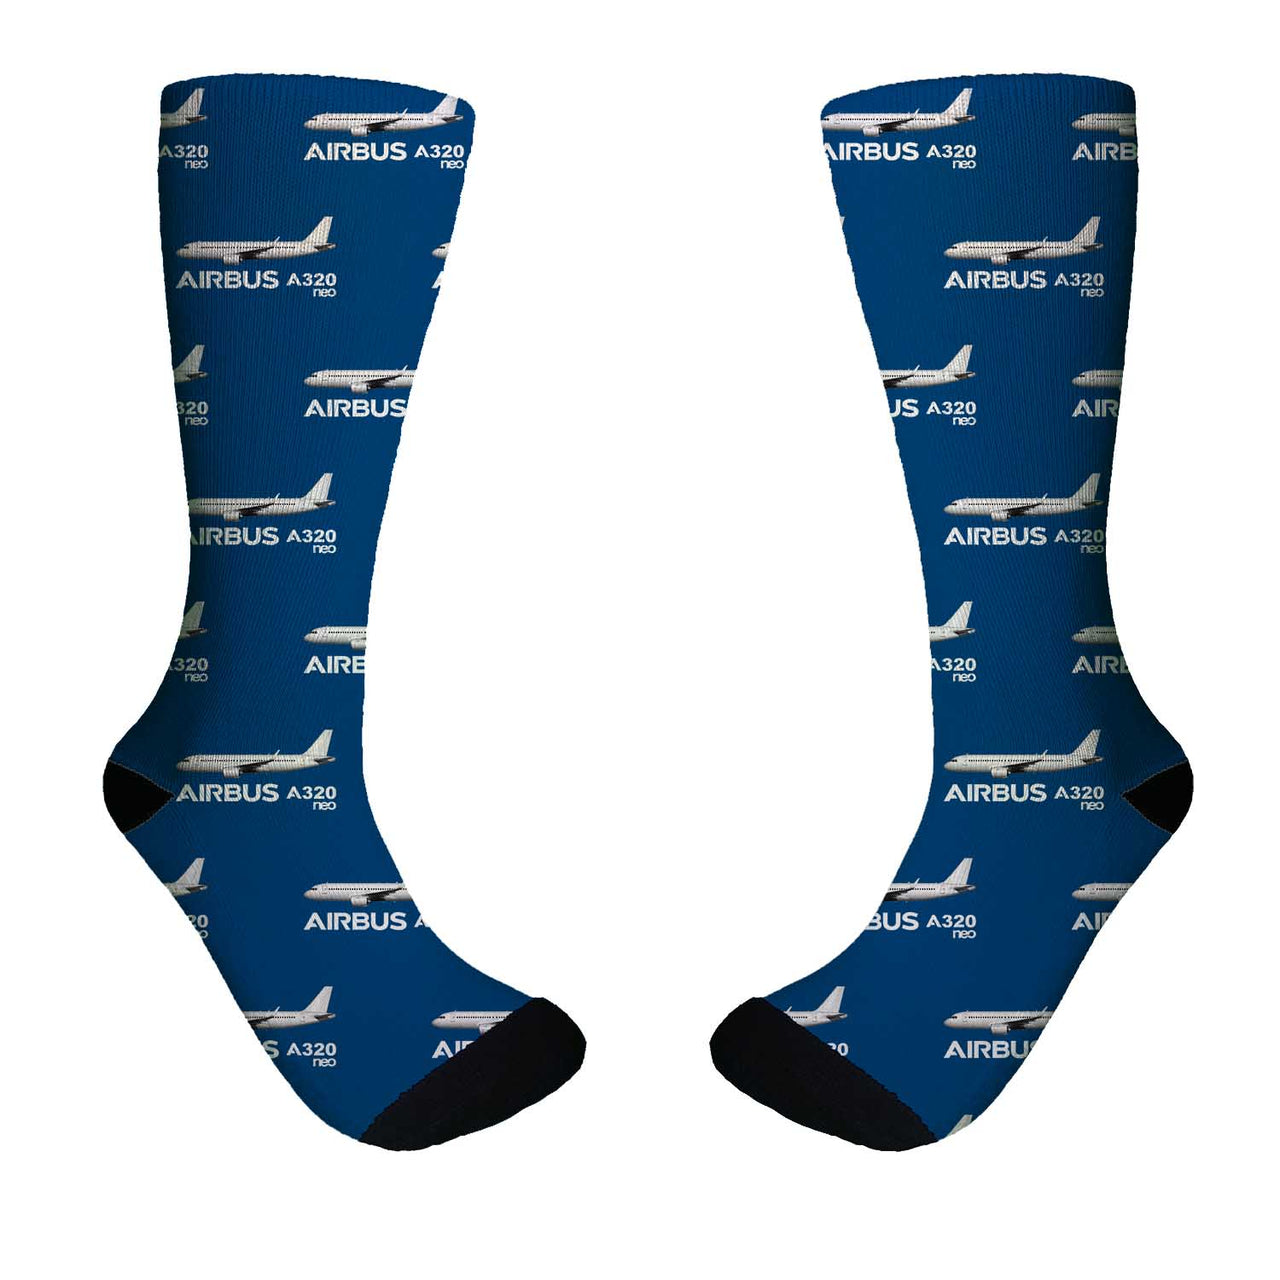 The Airbus A320Neo Designed Socks